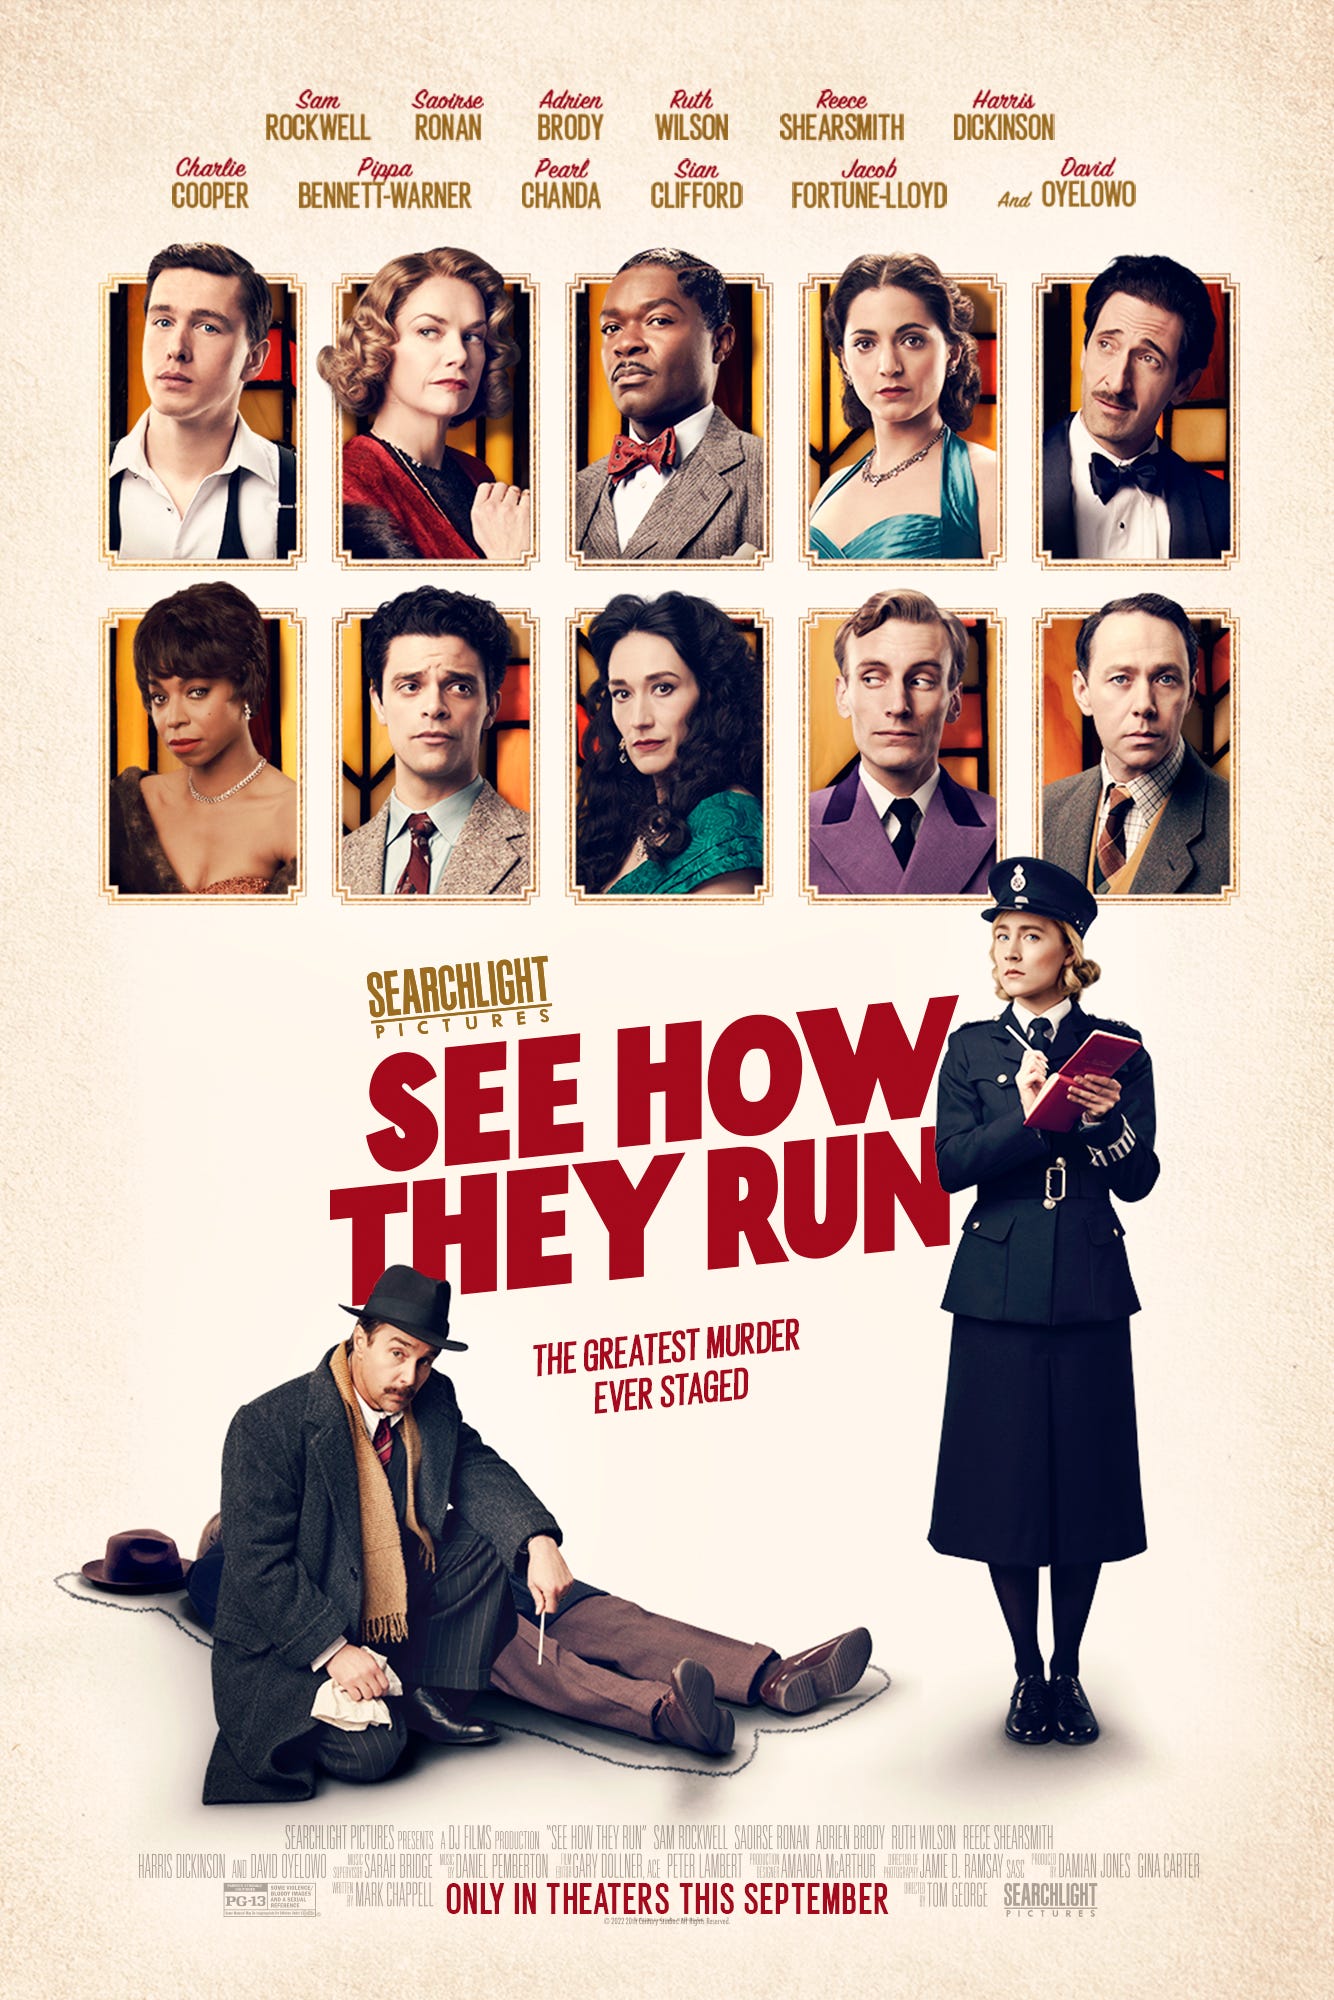 SEE HOW THEY RUN | Searchlight Pictures